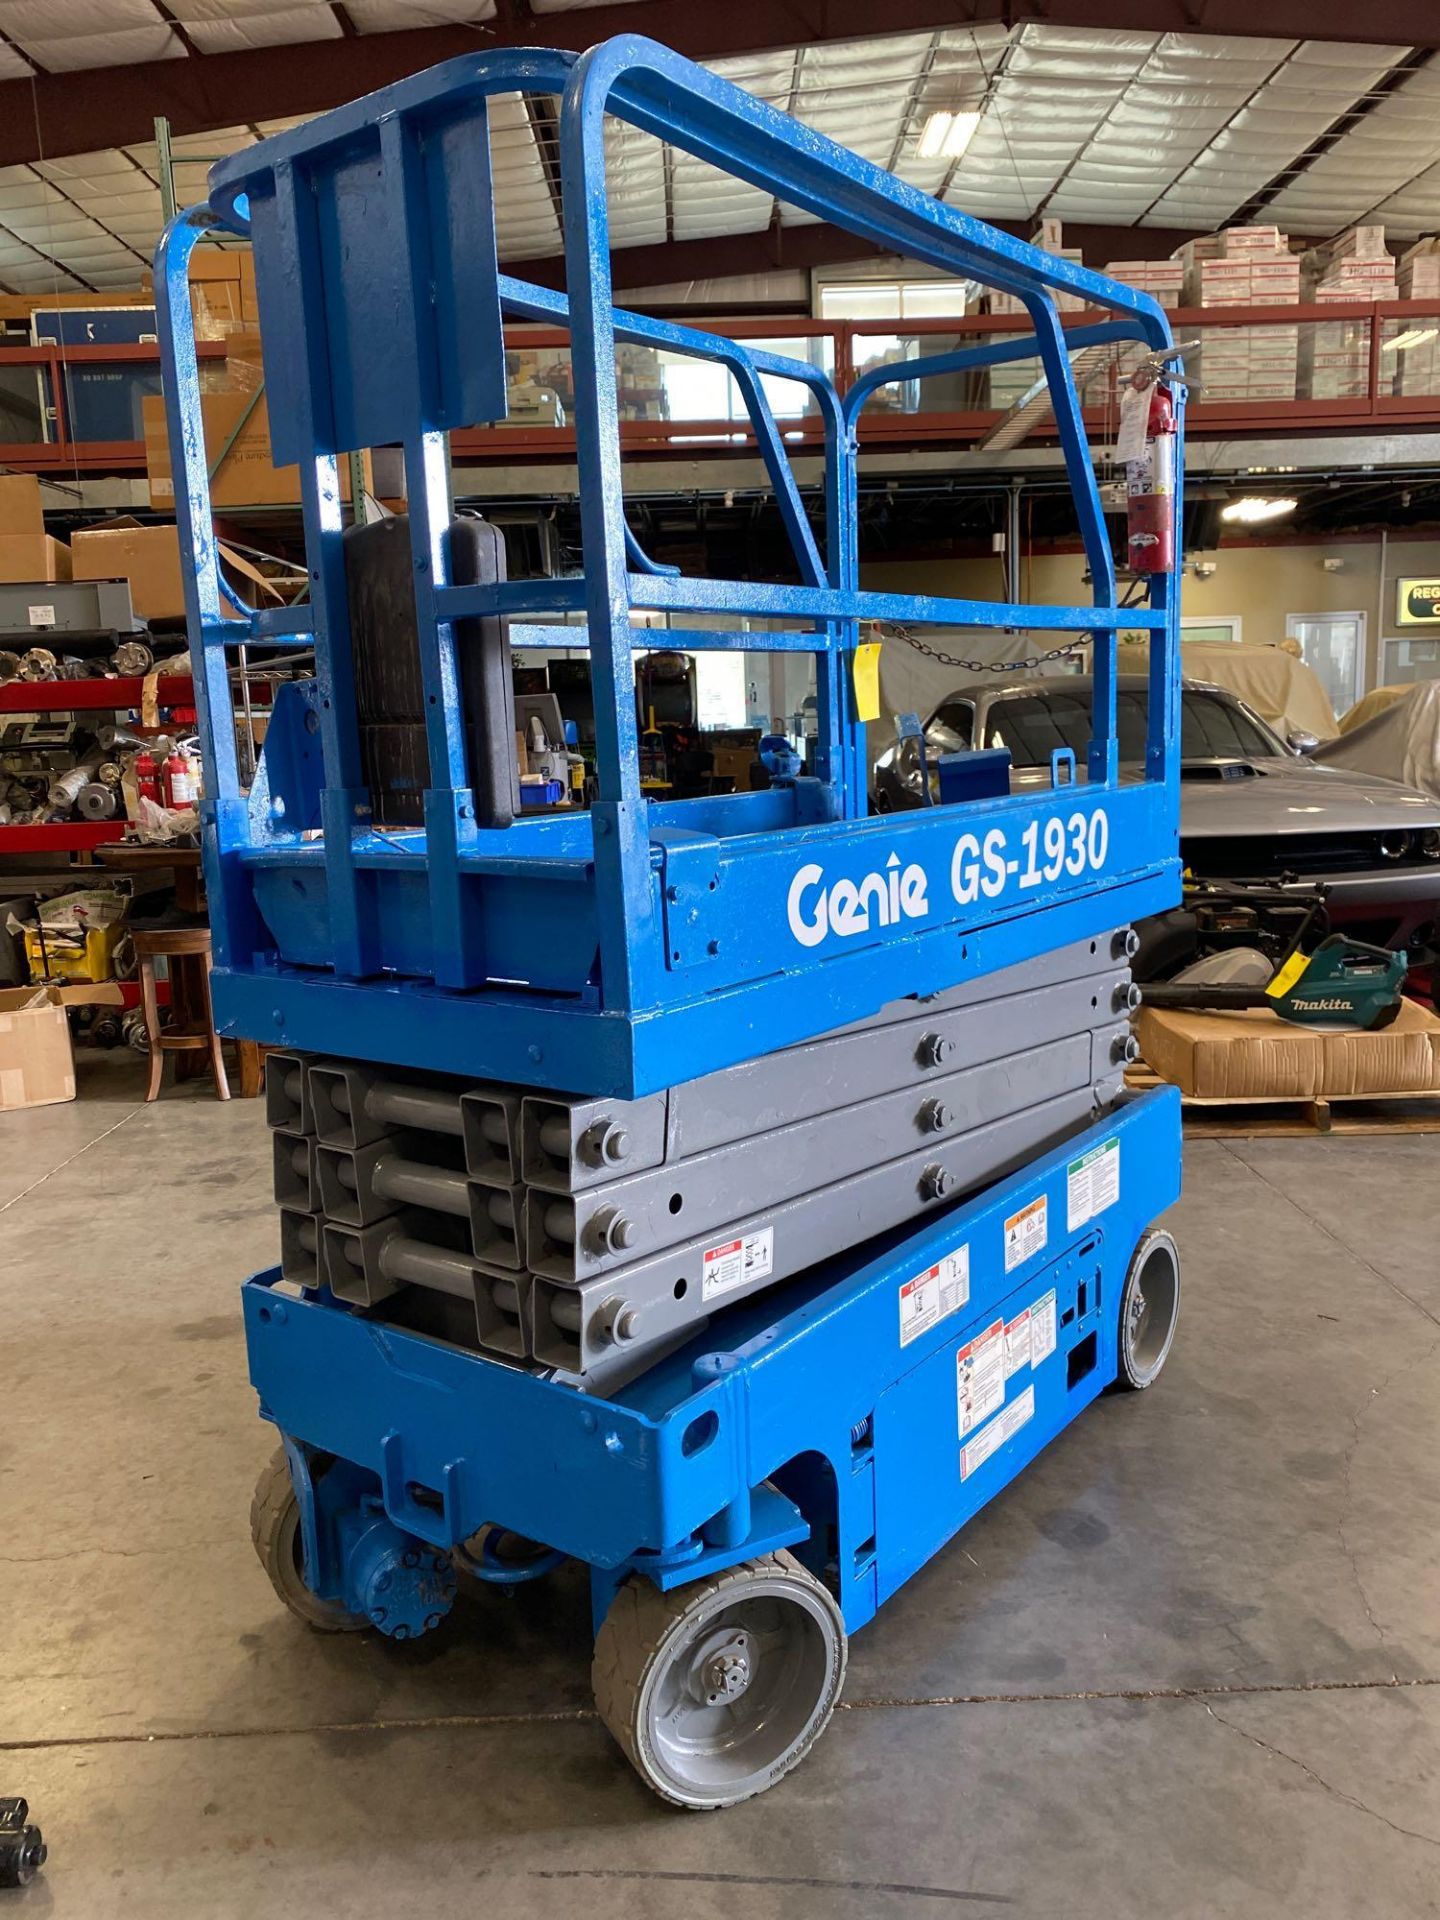 2013 GENIE GS-1930 ELECTRIC SCISSOR LIFT, 110 HOURS SHOWING, BUILT IN BATTERY CHARGER - Image 3 of 6